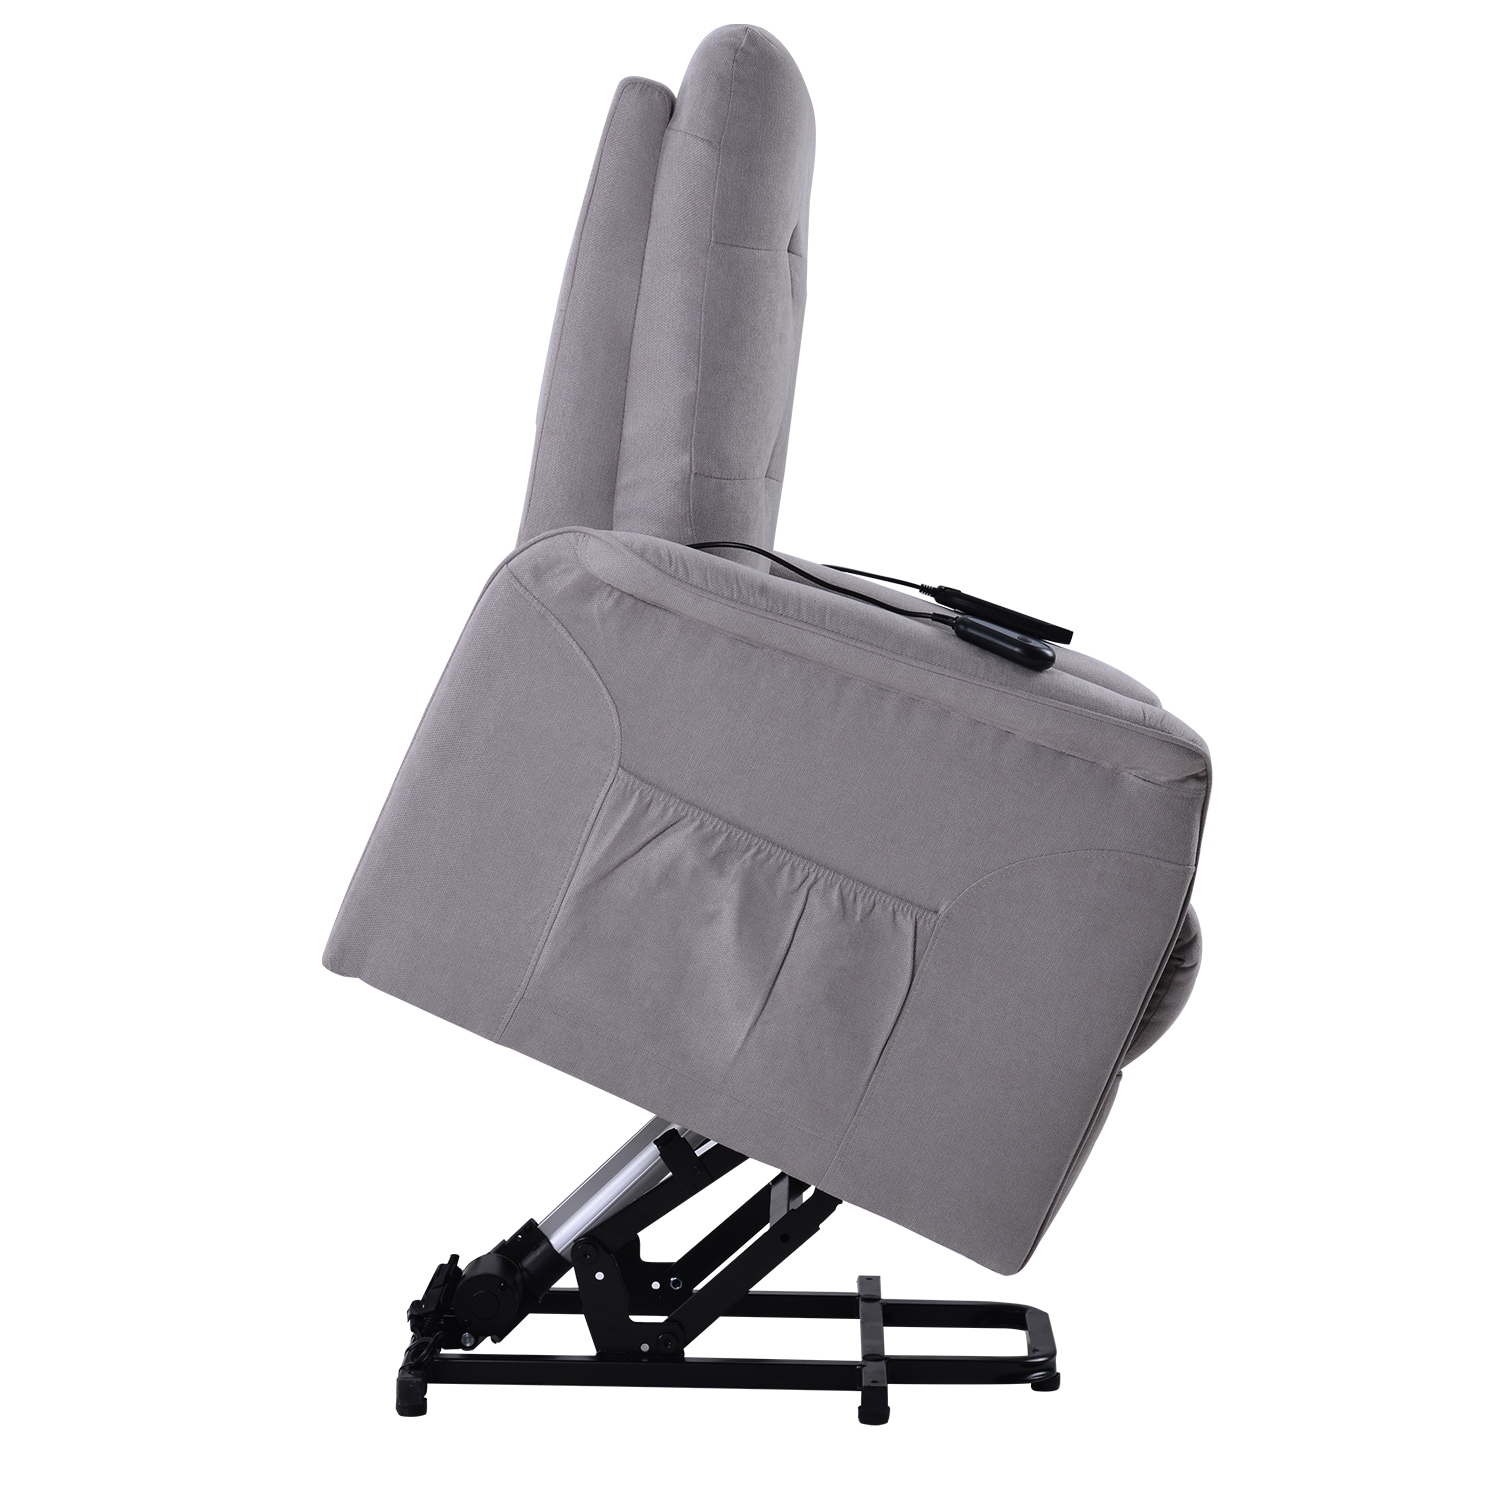 https://ak1.ostkcdn.com/images/products/is/images/direct/42f1678f2038291d1443e9afbe242bdff47c7614/Power-Lift-Chair-for-Elderly-with-Adjustable-Massage-Function-Recliner-Chair-for-Living-Room.jpg